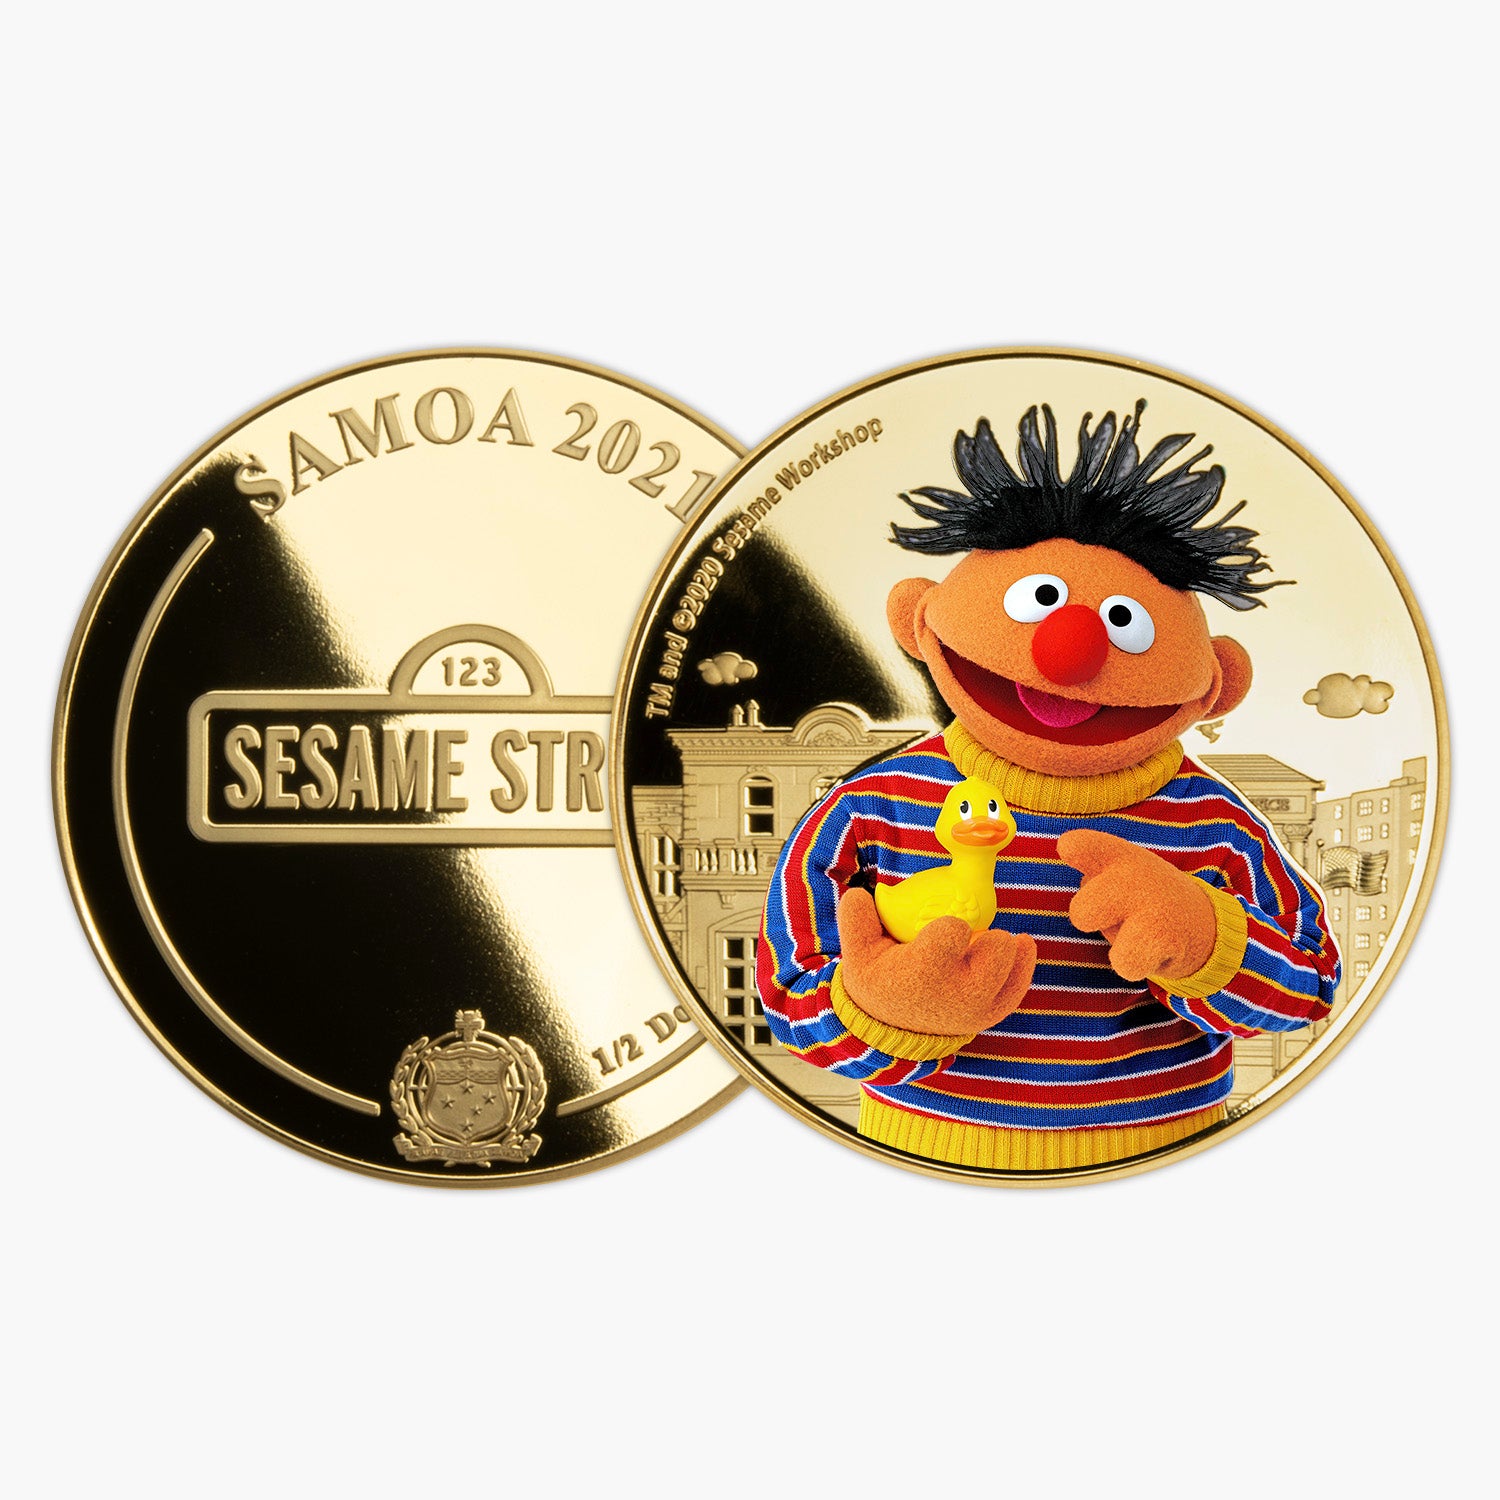 The Complete 2021 Sesame Street Coin Collection